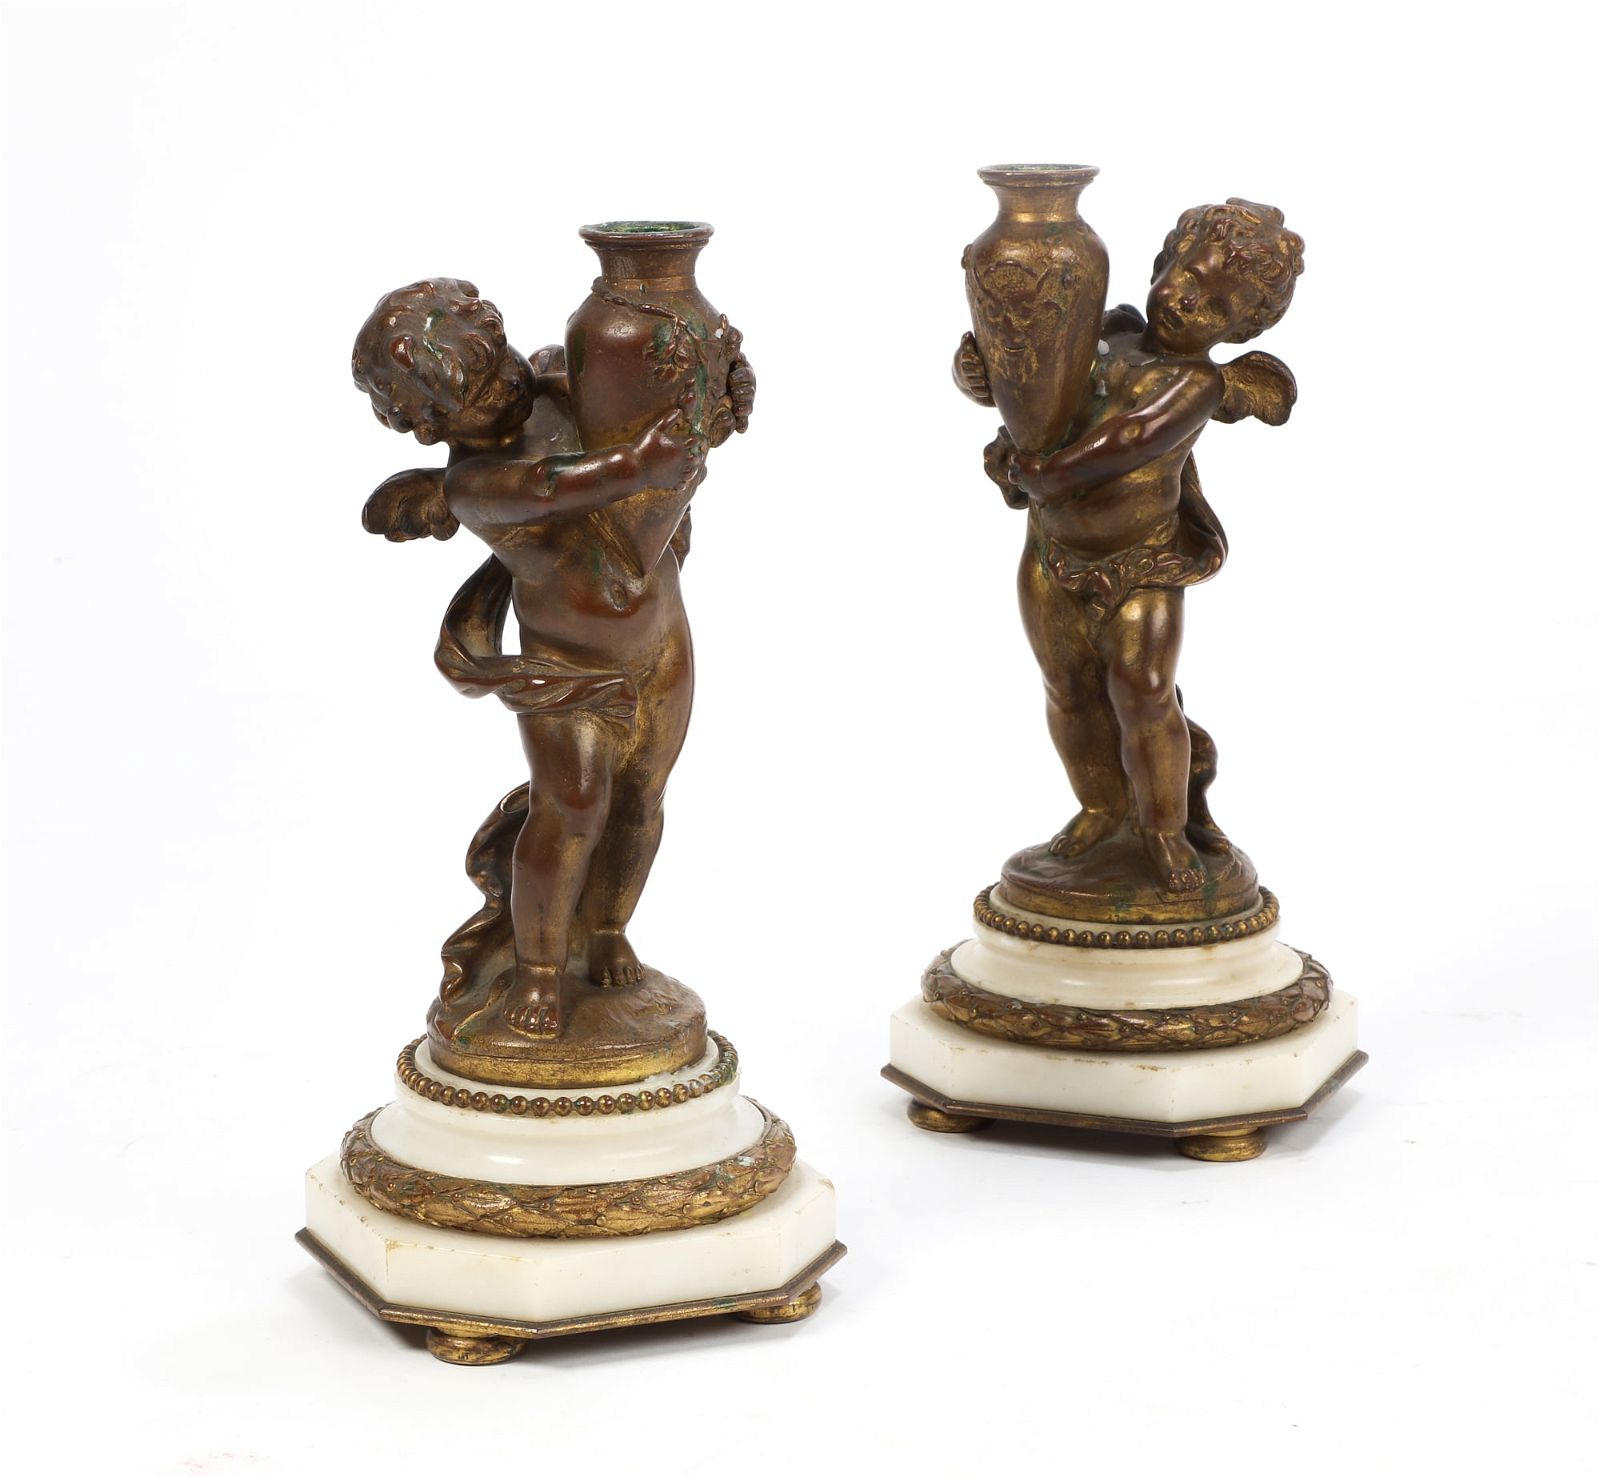 A PAIR OF FRENCH BRONZE AND MARBLECANDLESTICKSA